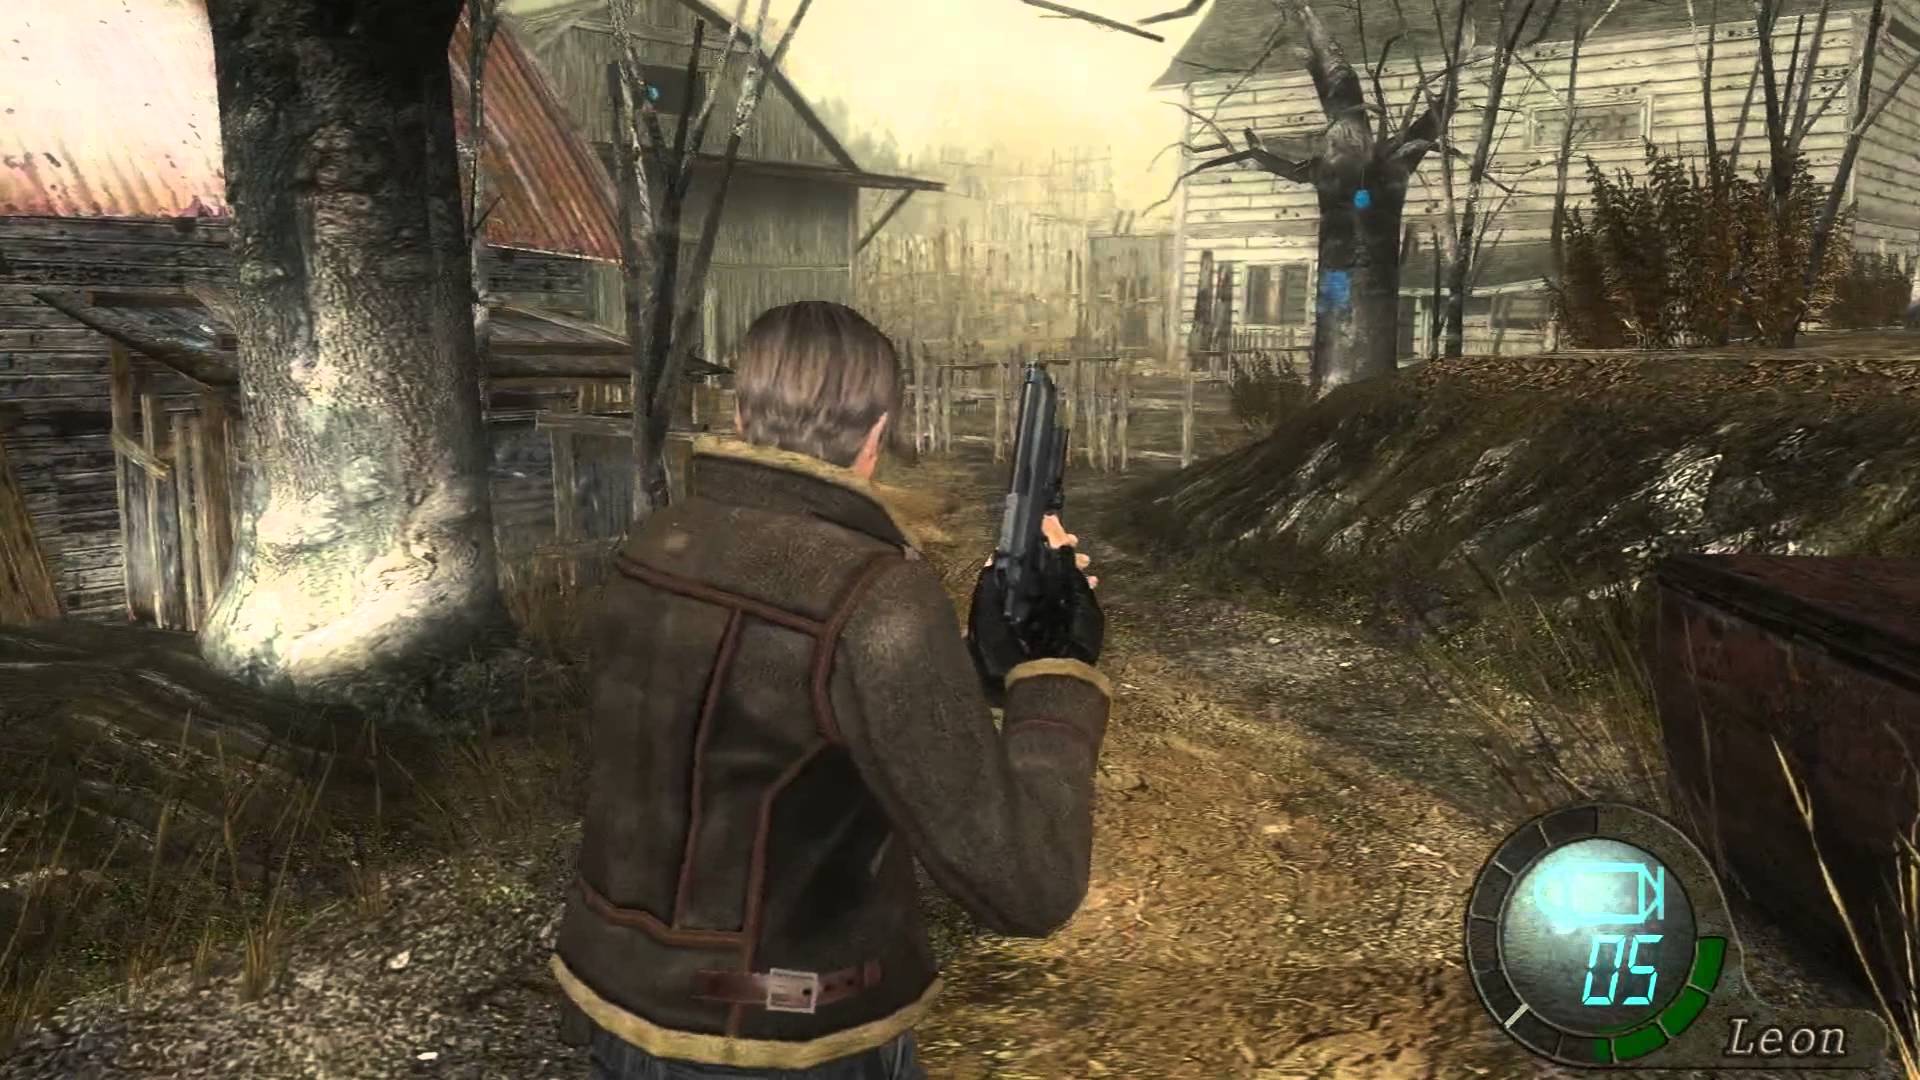 will they remake resident evil 4